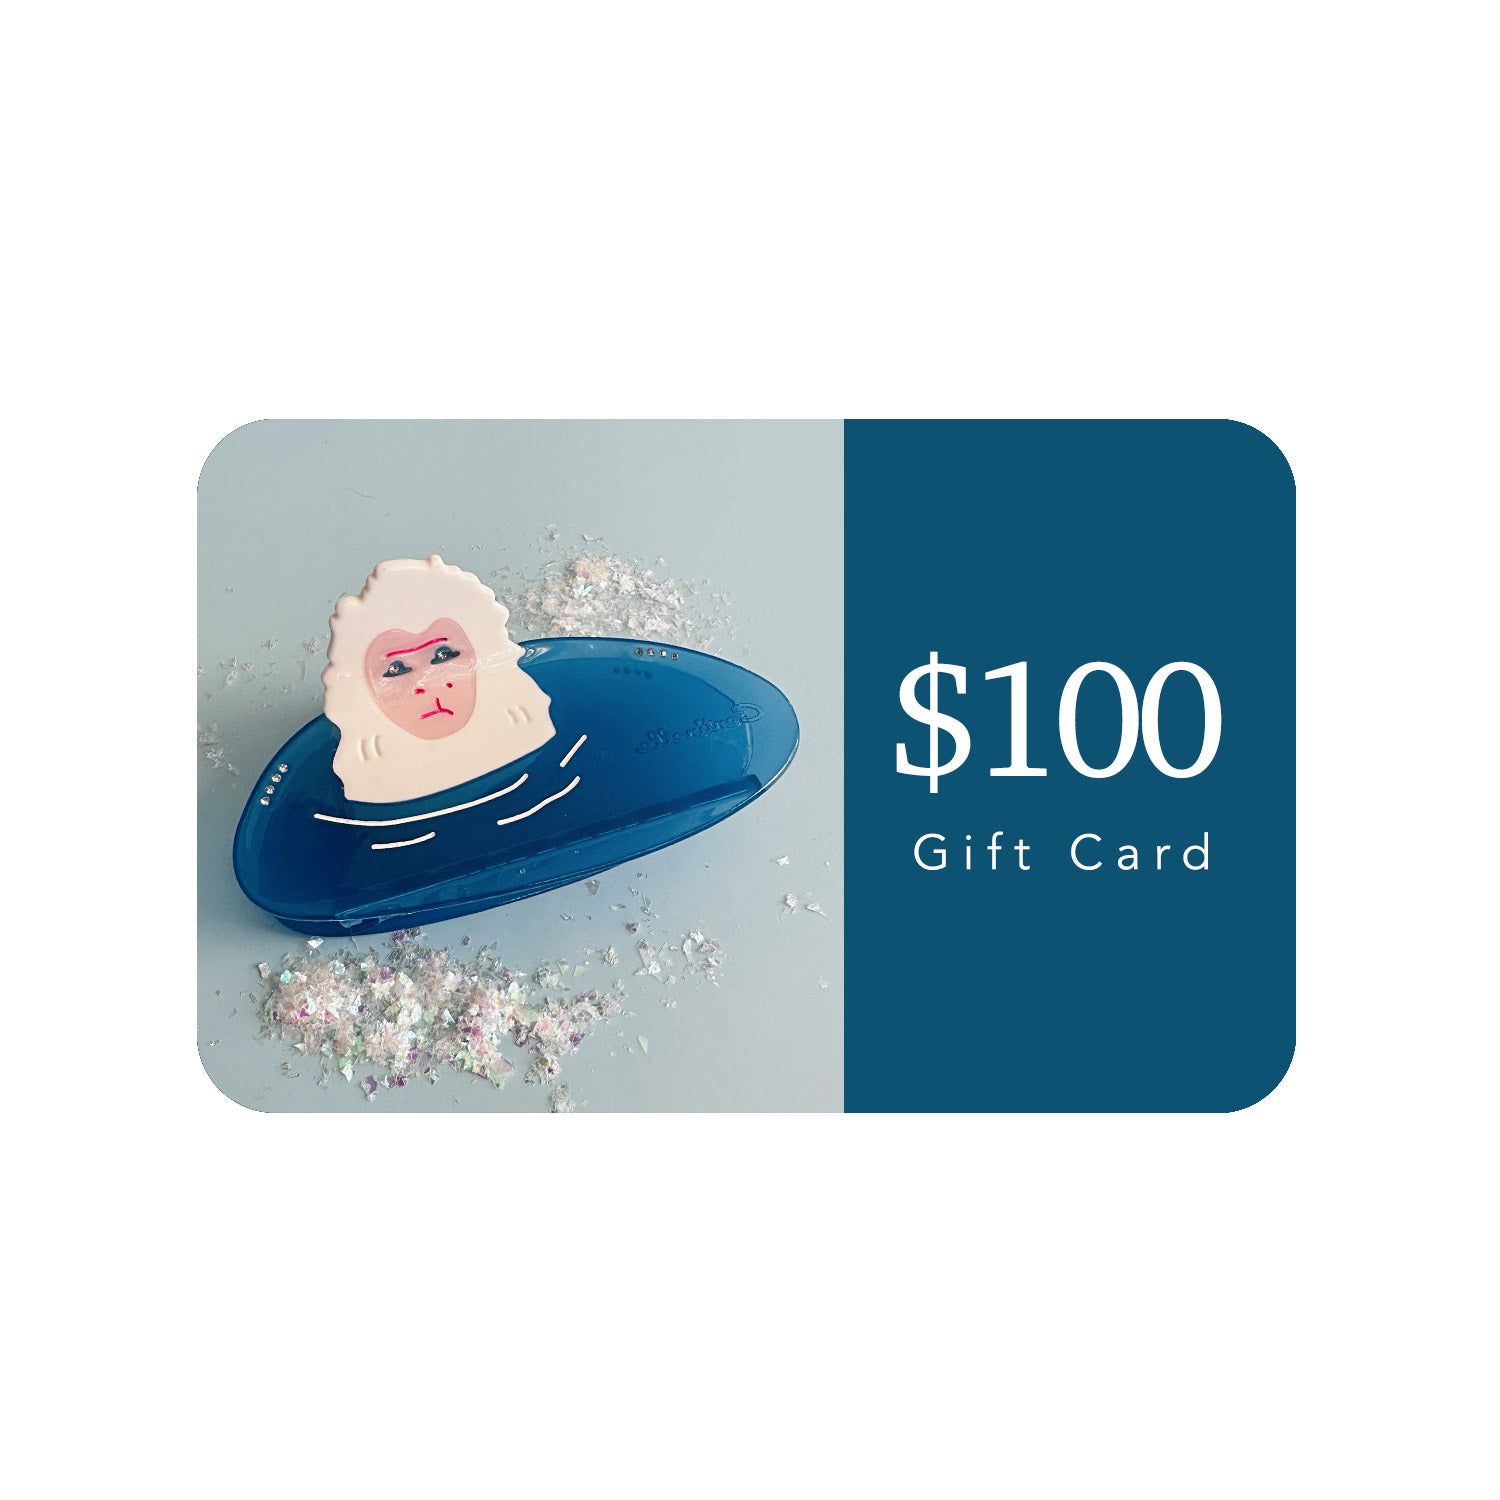 Centinelle gift card with 100 dollars value.